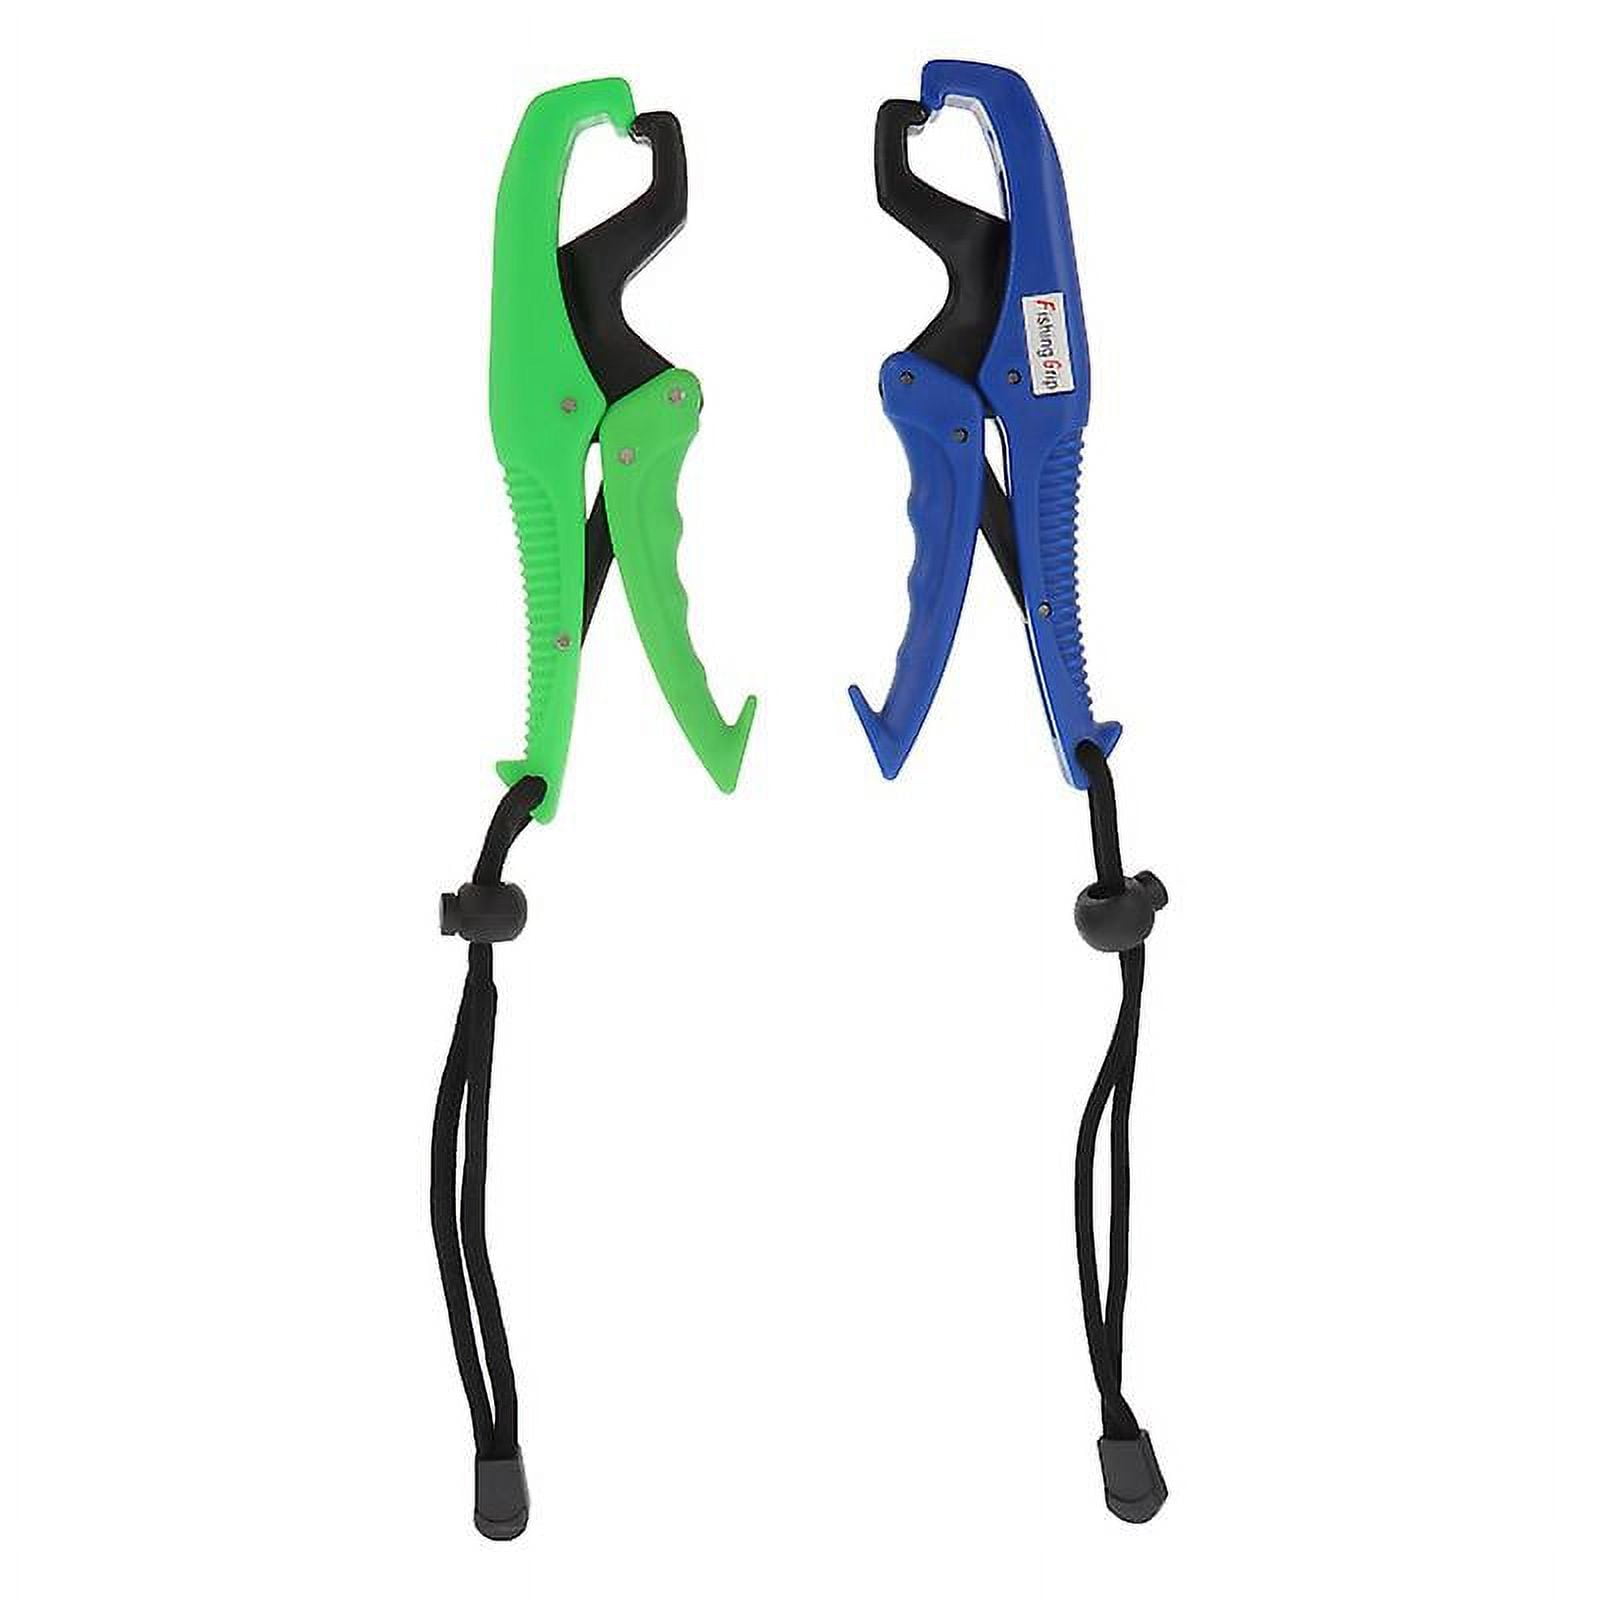 Floating Fish Gripper Lightweight Portable Fish Gripper with Non